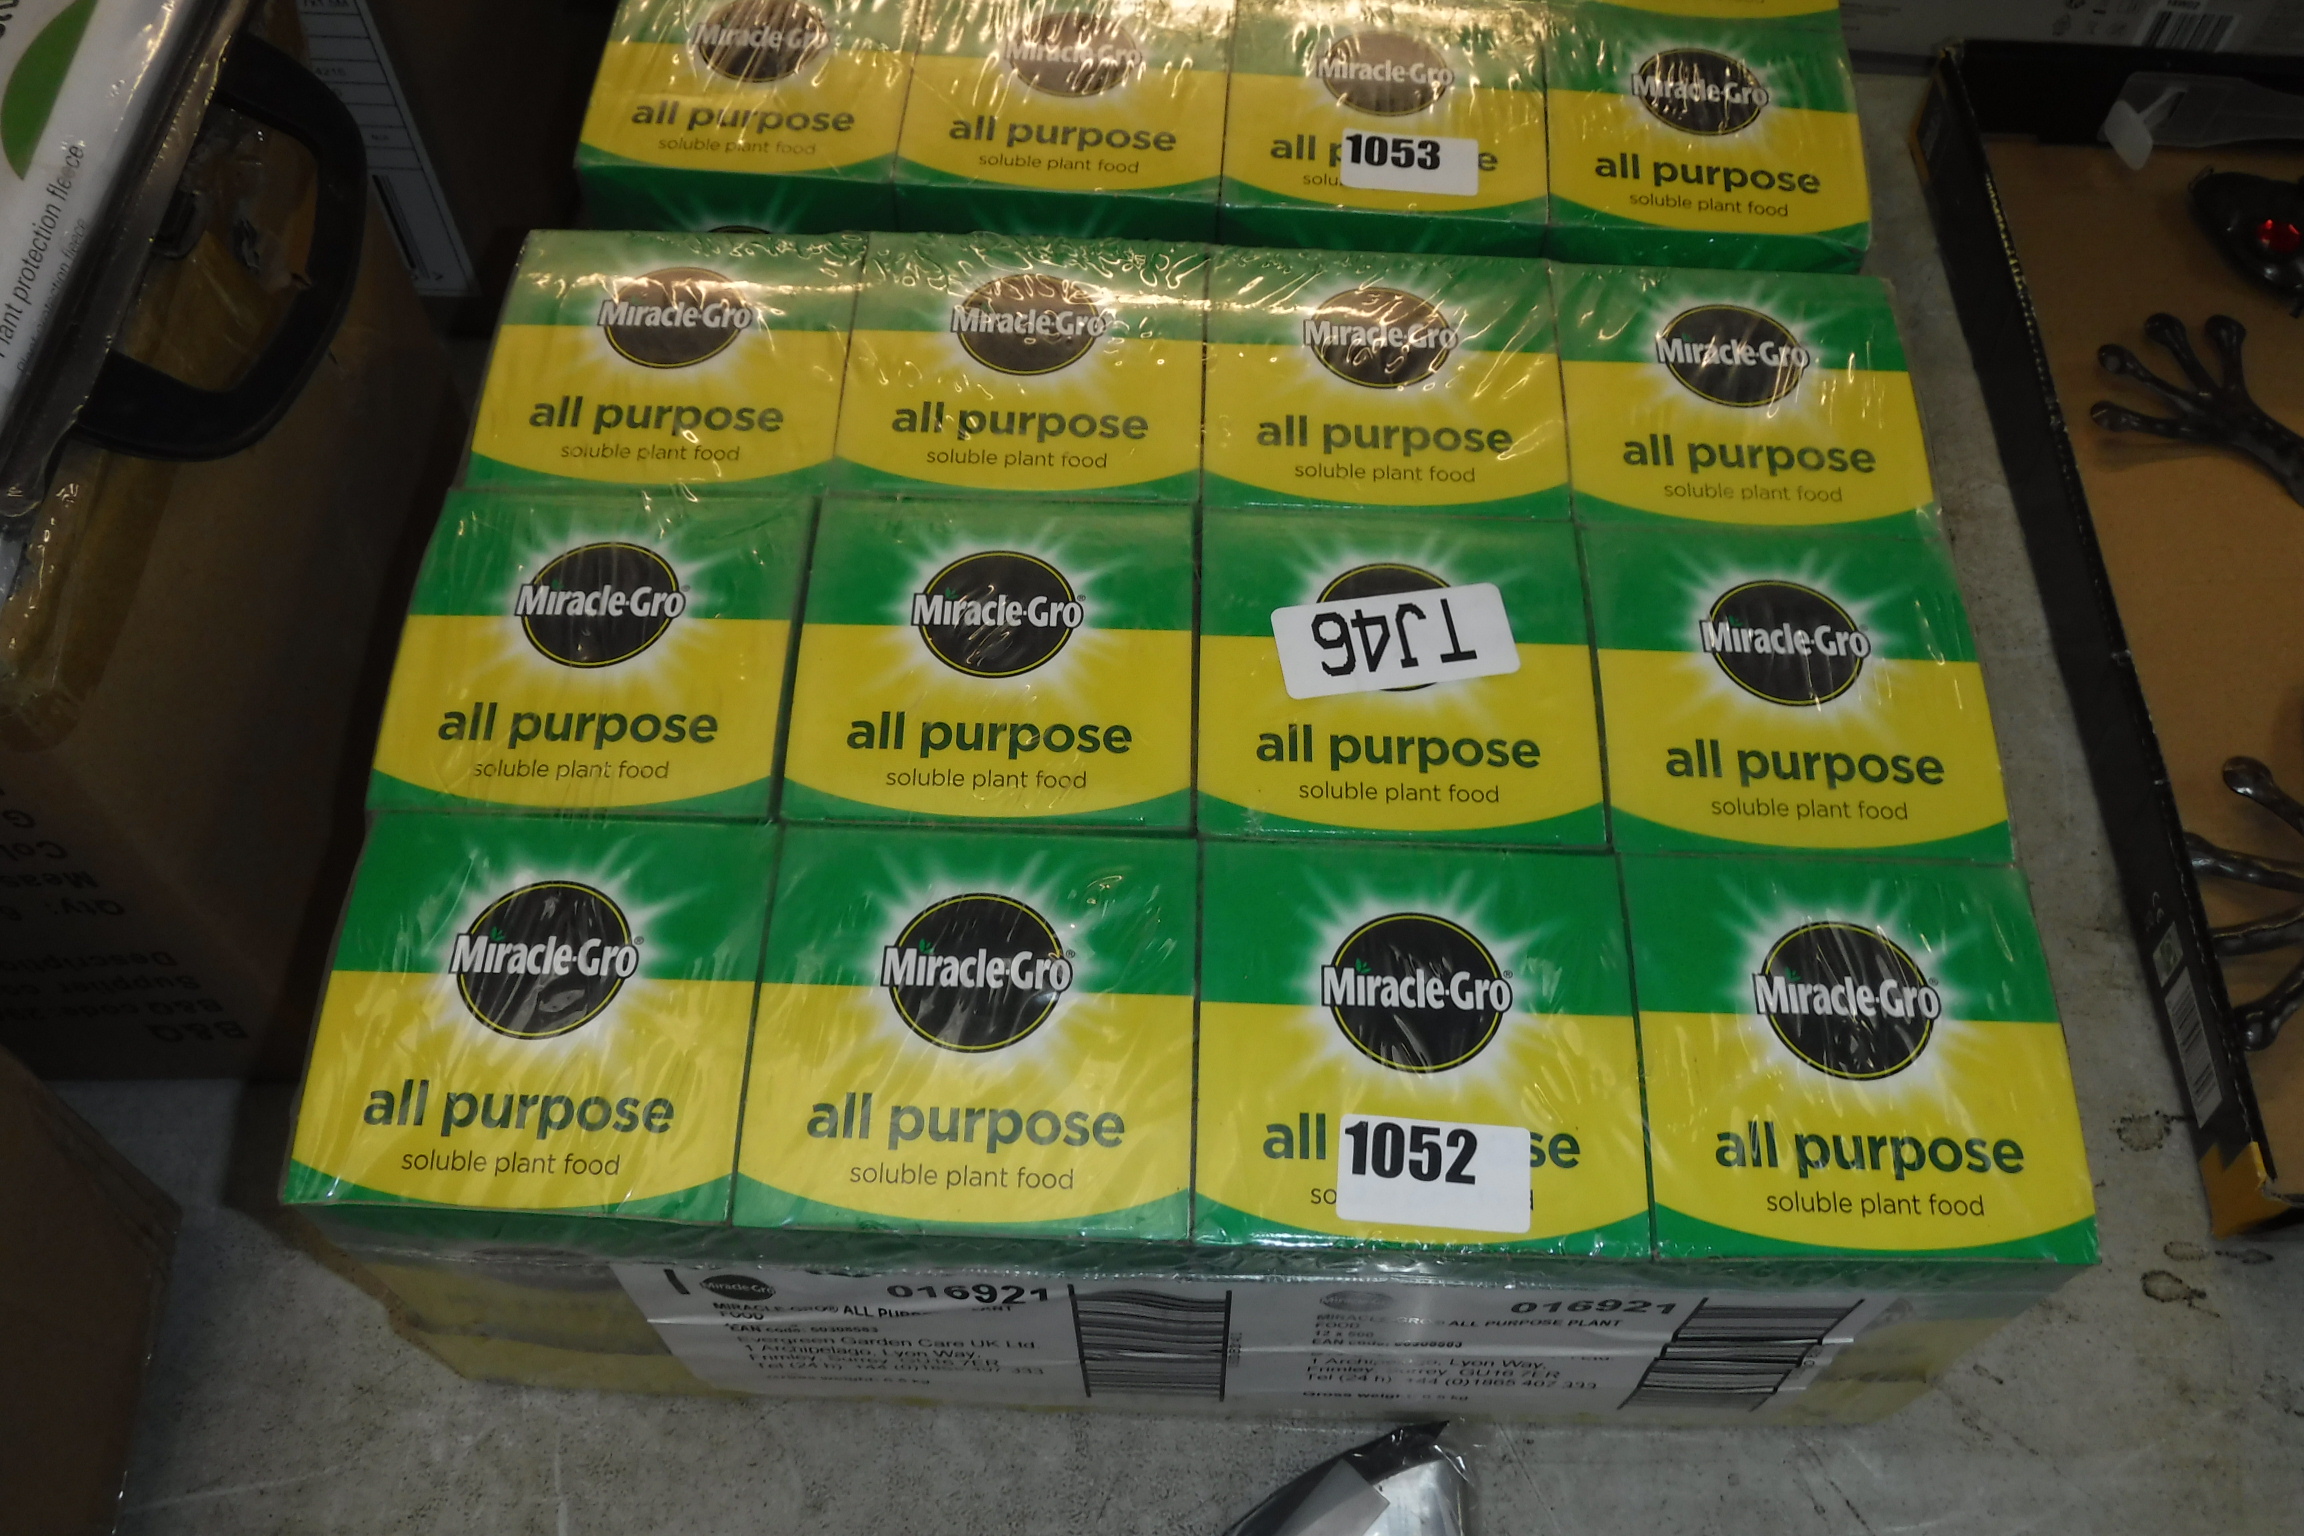 12 packs of all purpose soluble plant food